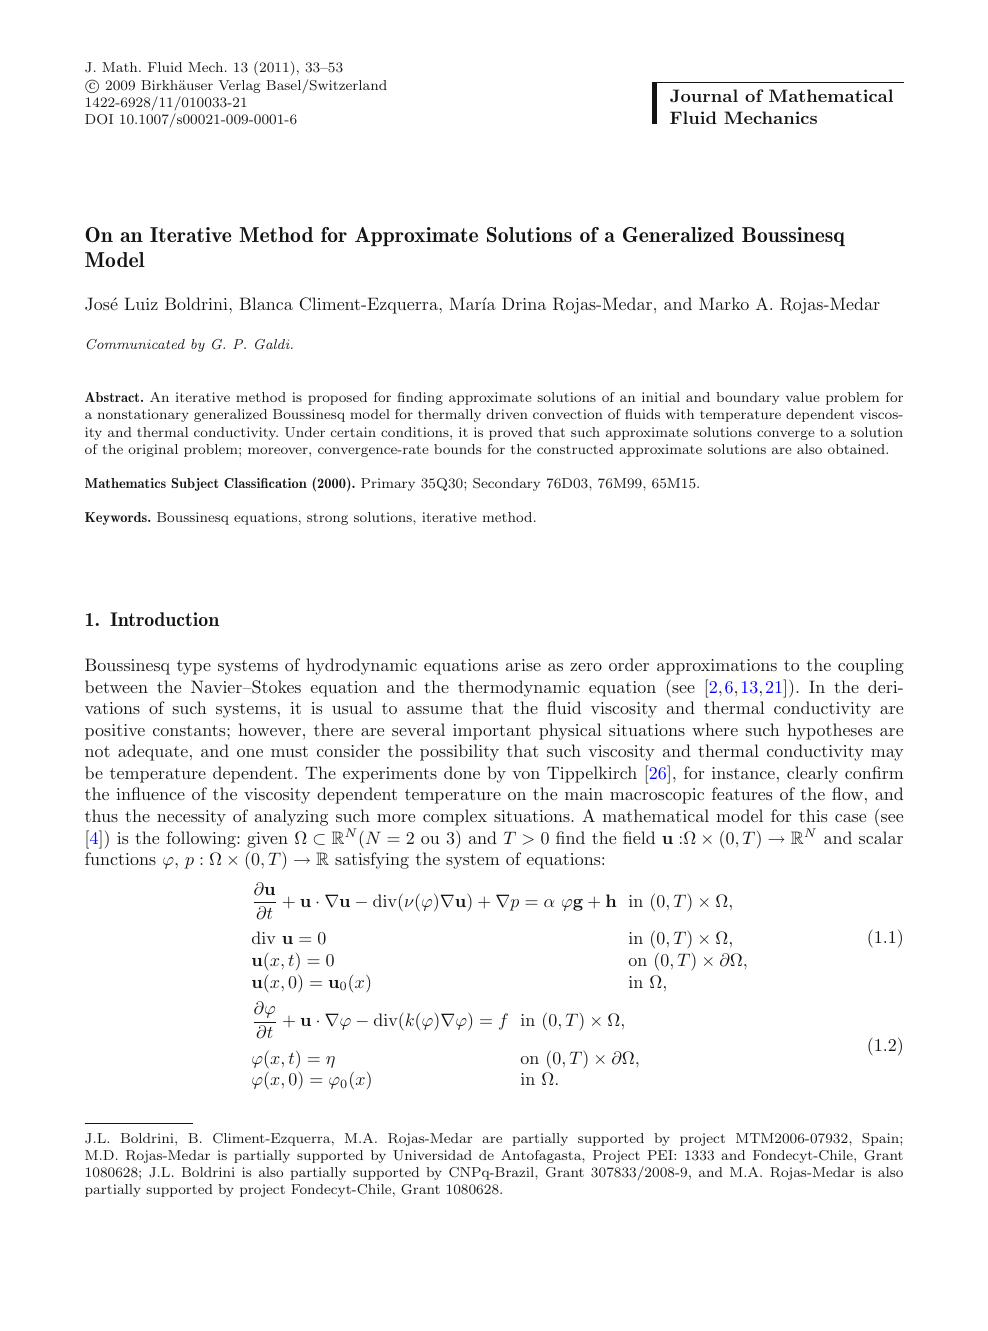 On An Iterative Method For Approximate Solutions Of A Generalized Boussinesq Model Topic Of Research Paper In Mathematics Download Scholarly Article Pdf And Read For Free On Cyberleninka Open Science Hub